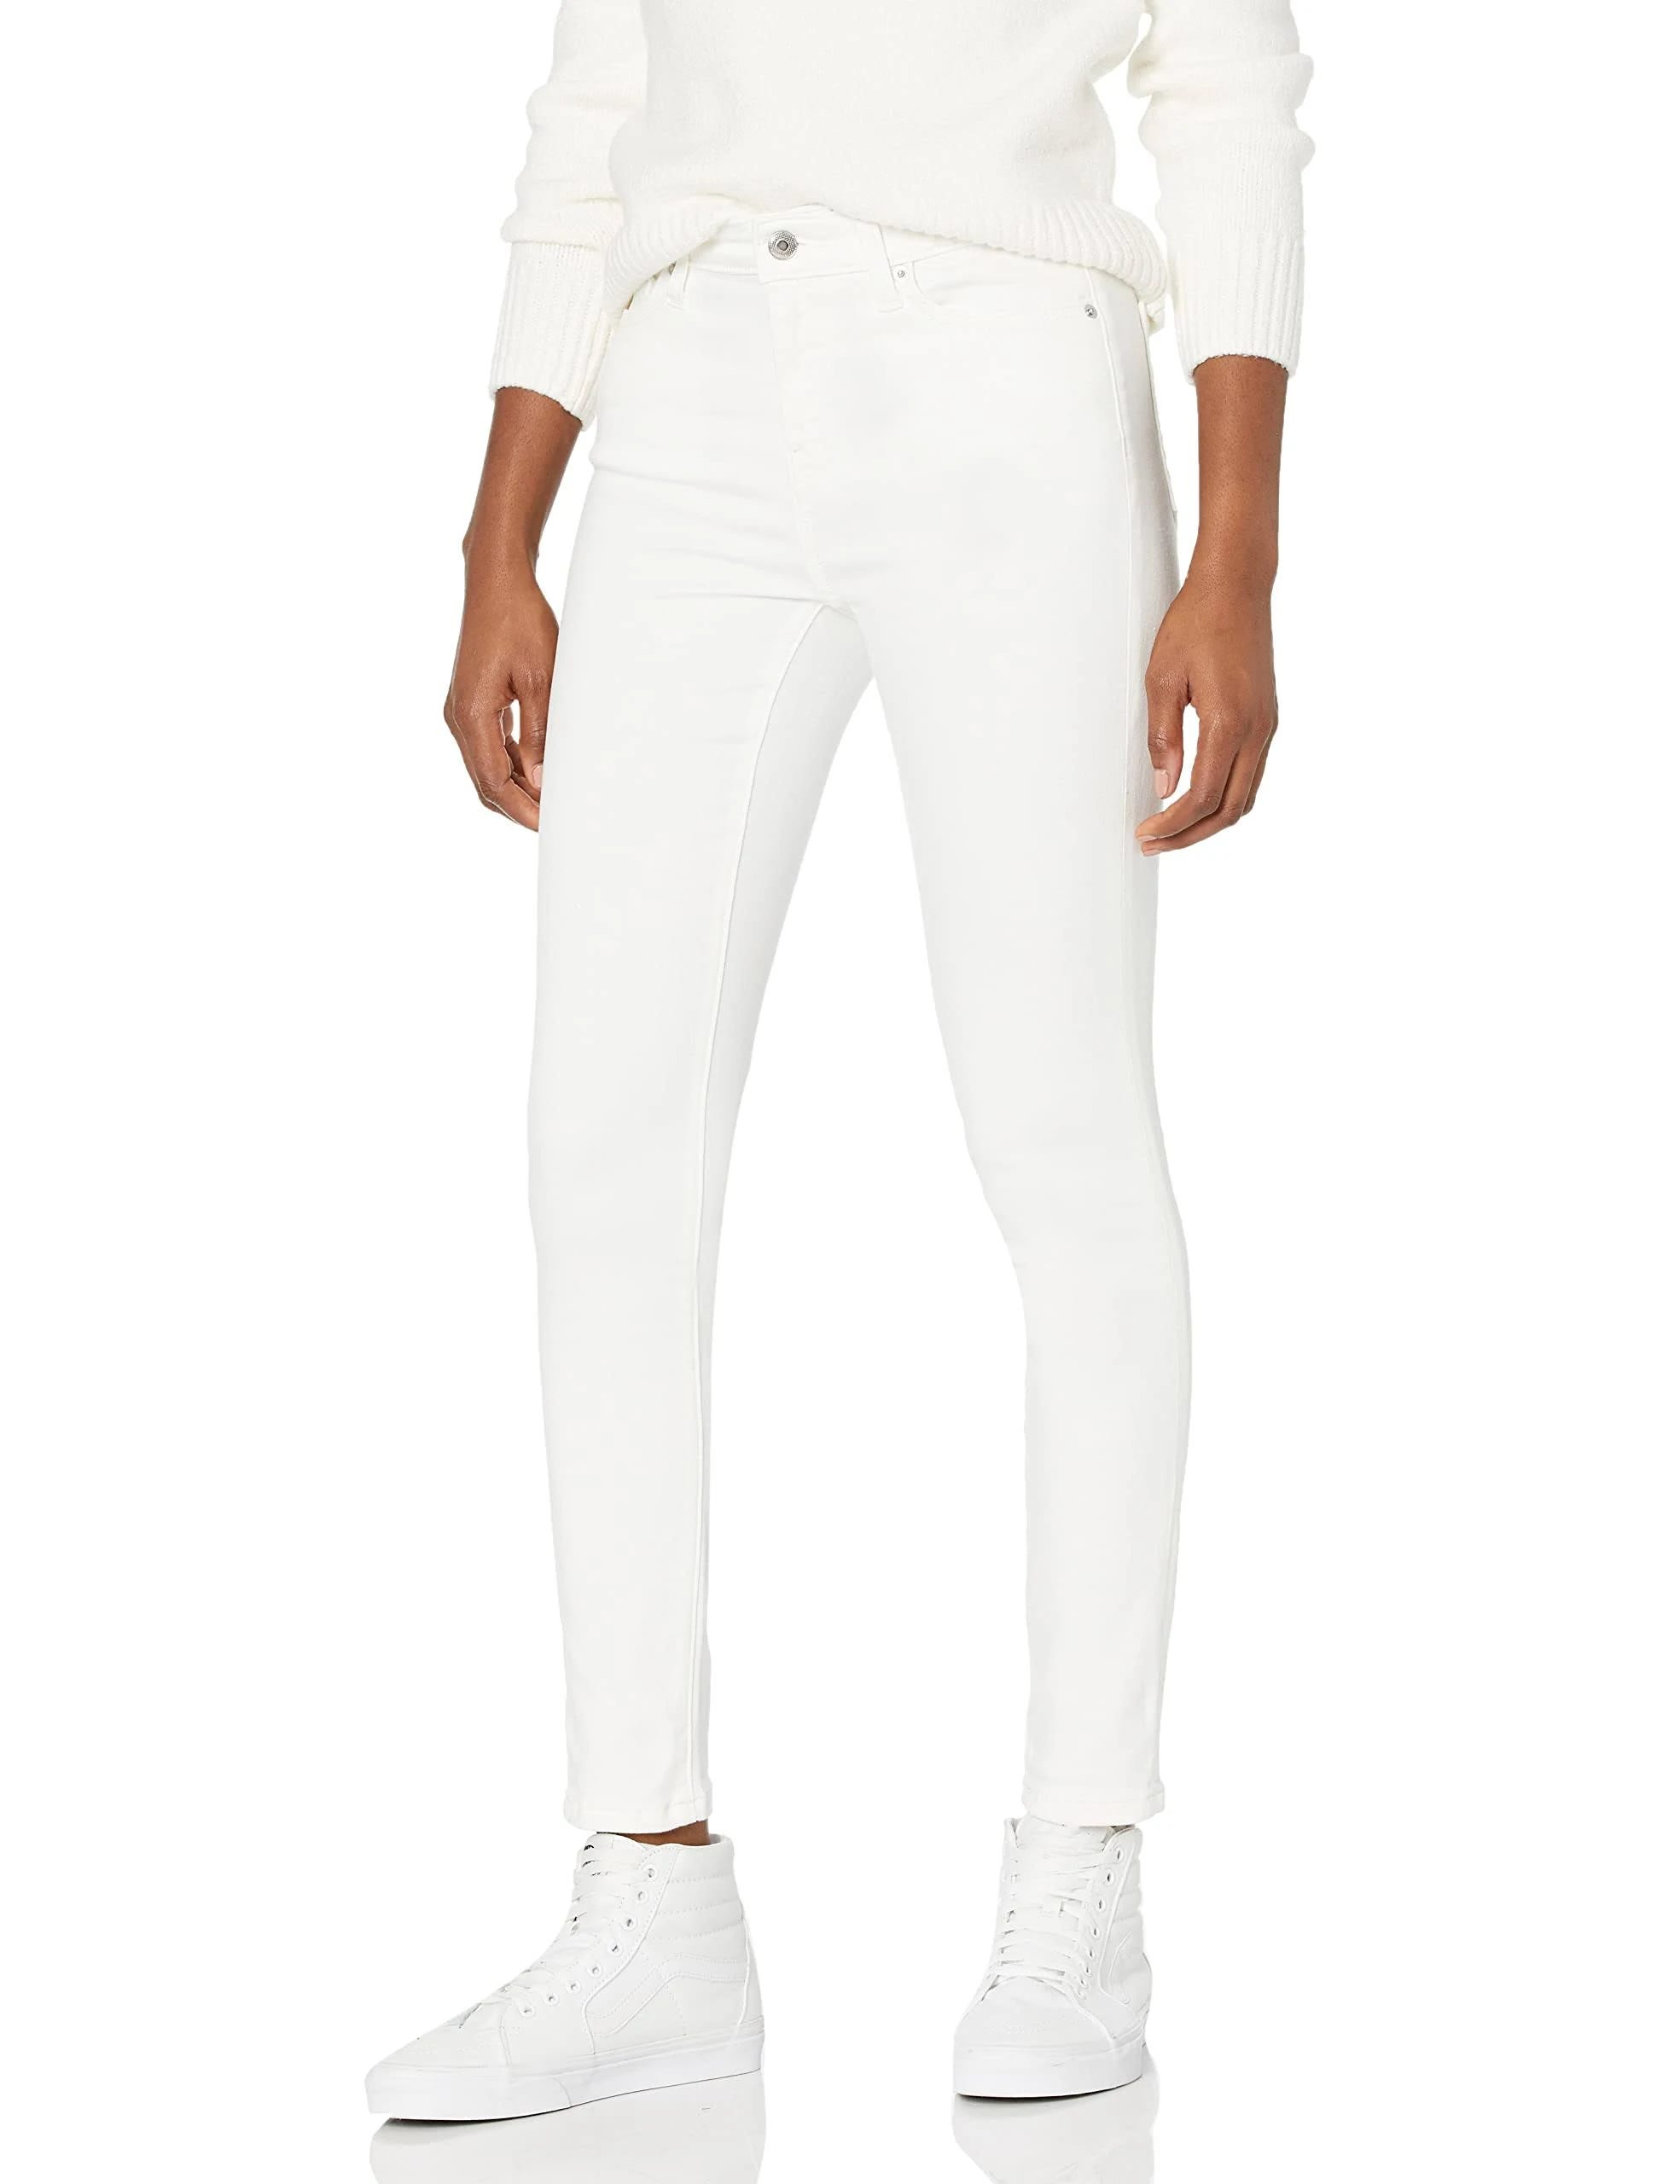 Skinny White Jeans for Women in Size 8 | Image